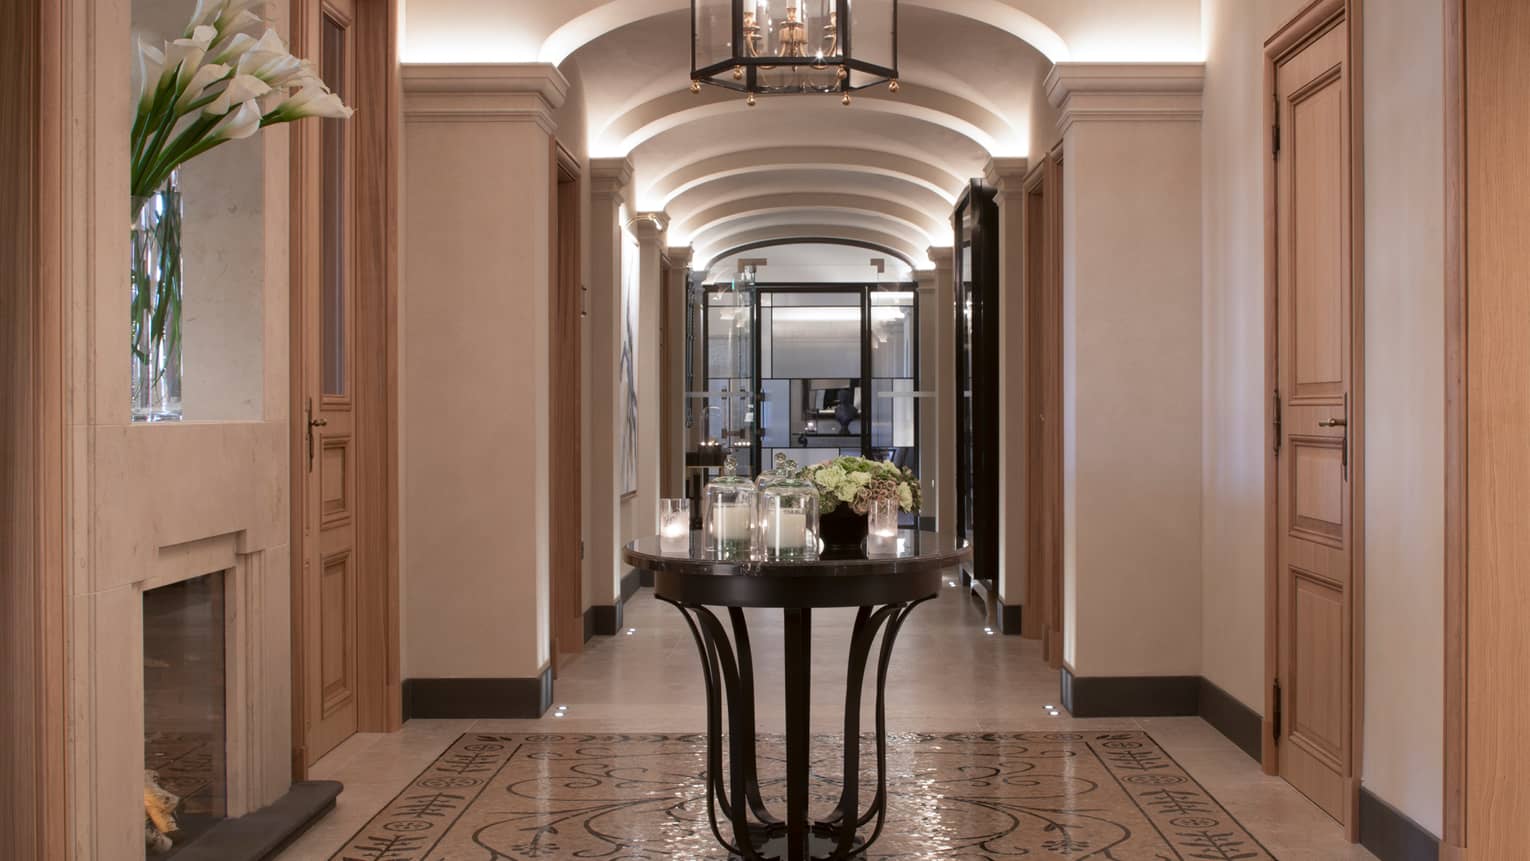 Hotel hallway with marble floors, round table with multiple white candles in glass votives, fresh flowers